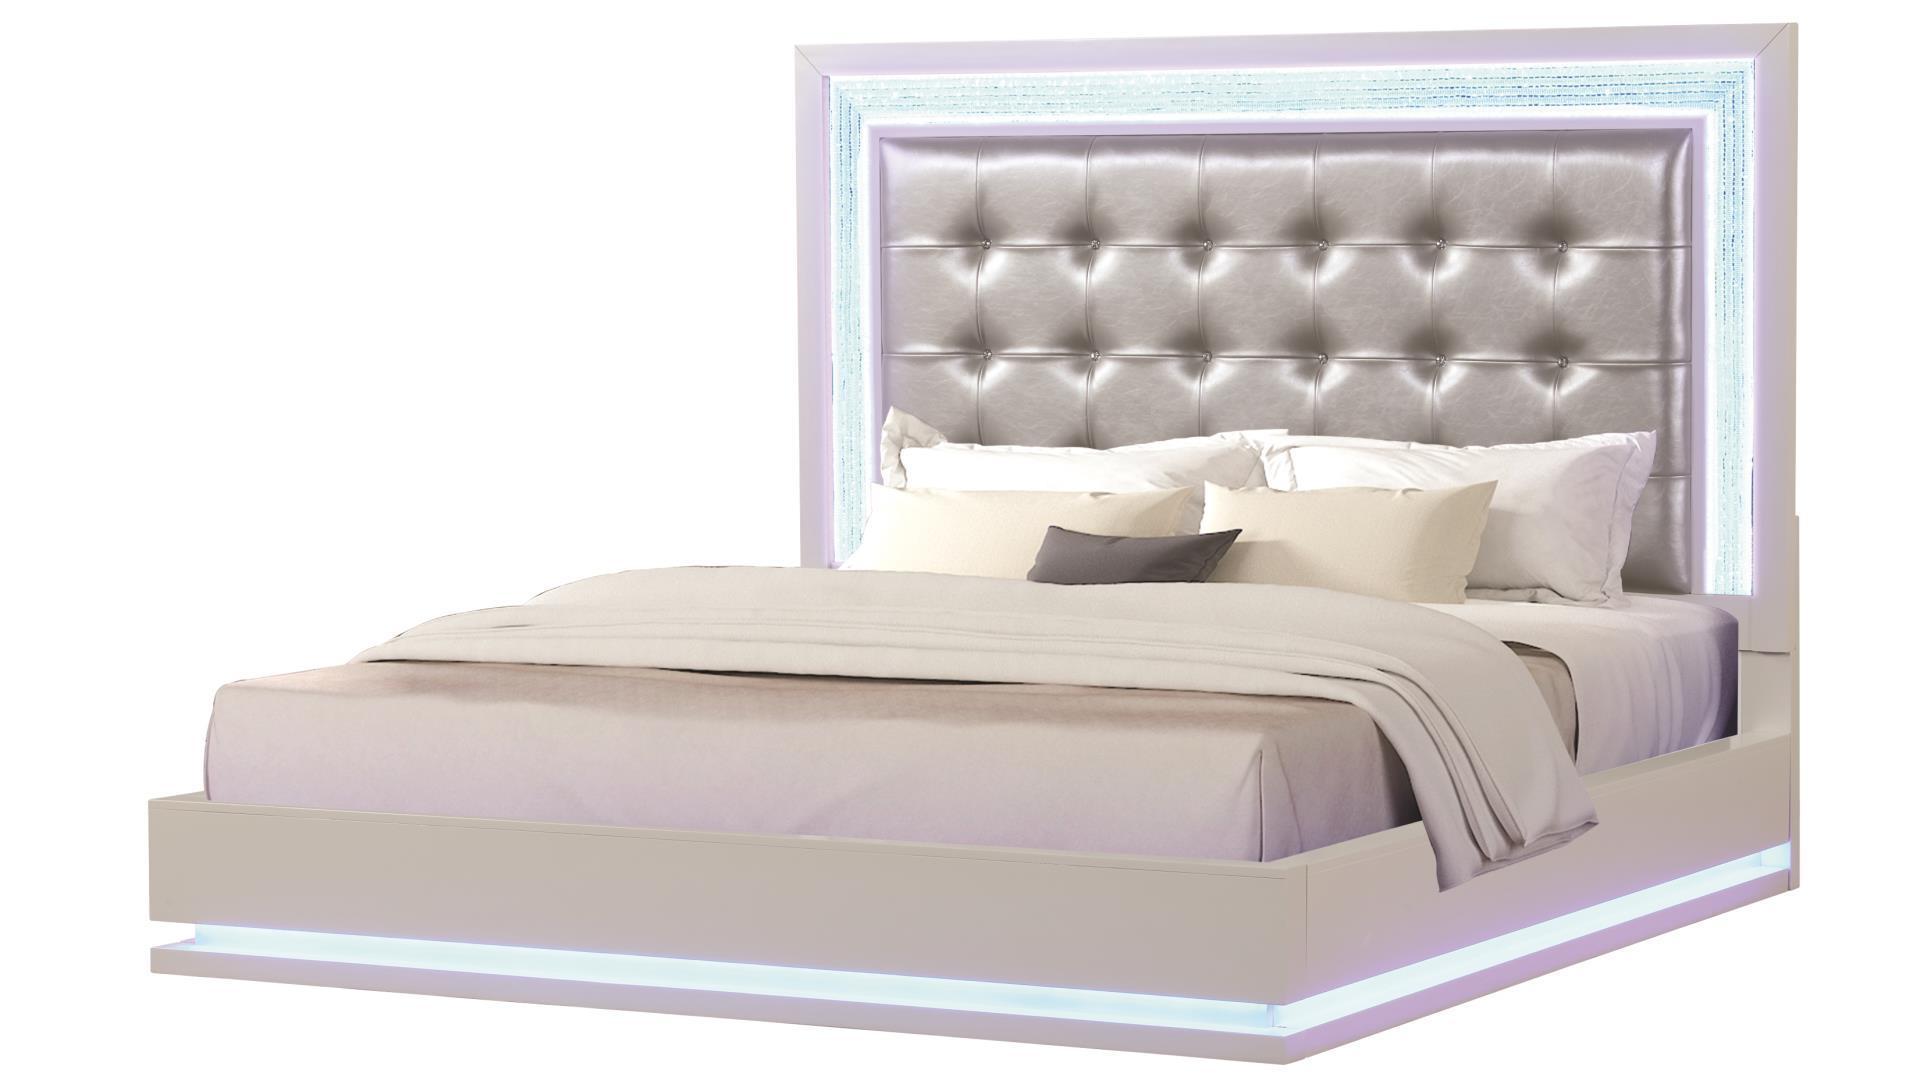 

    
Milky White Tufted Queen Led Bed Set w/Vanity 5Pcs PASSION Galaxy Home Modern
